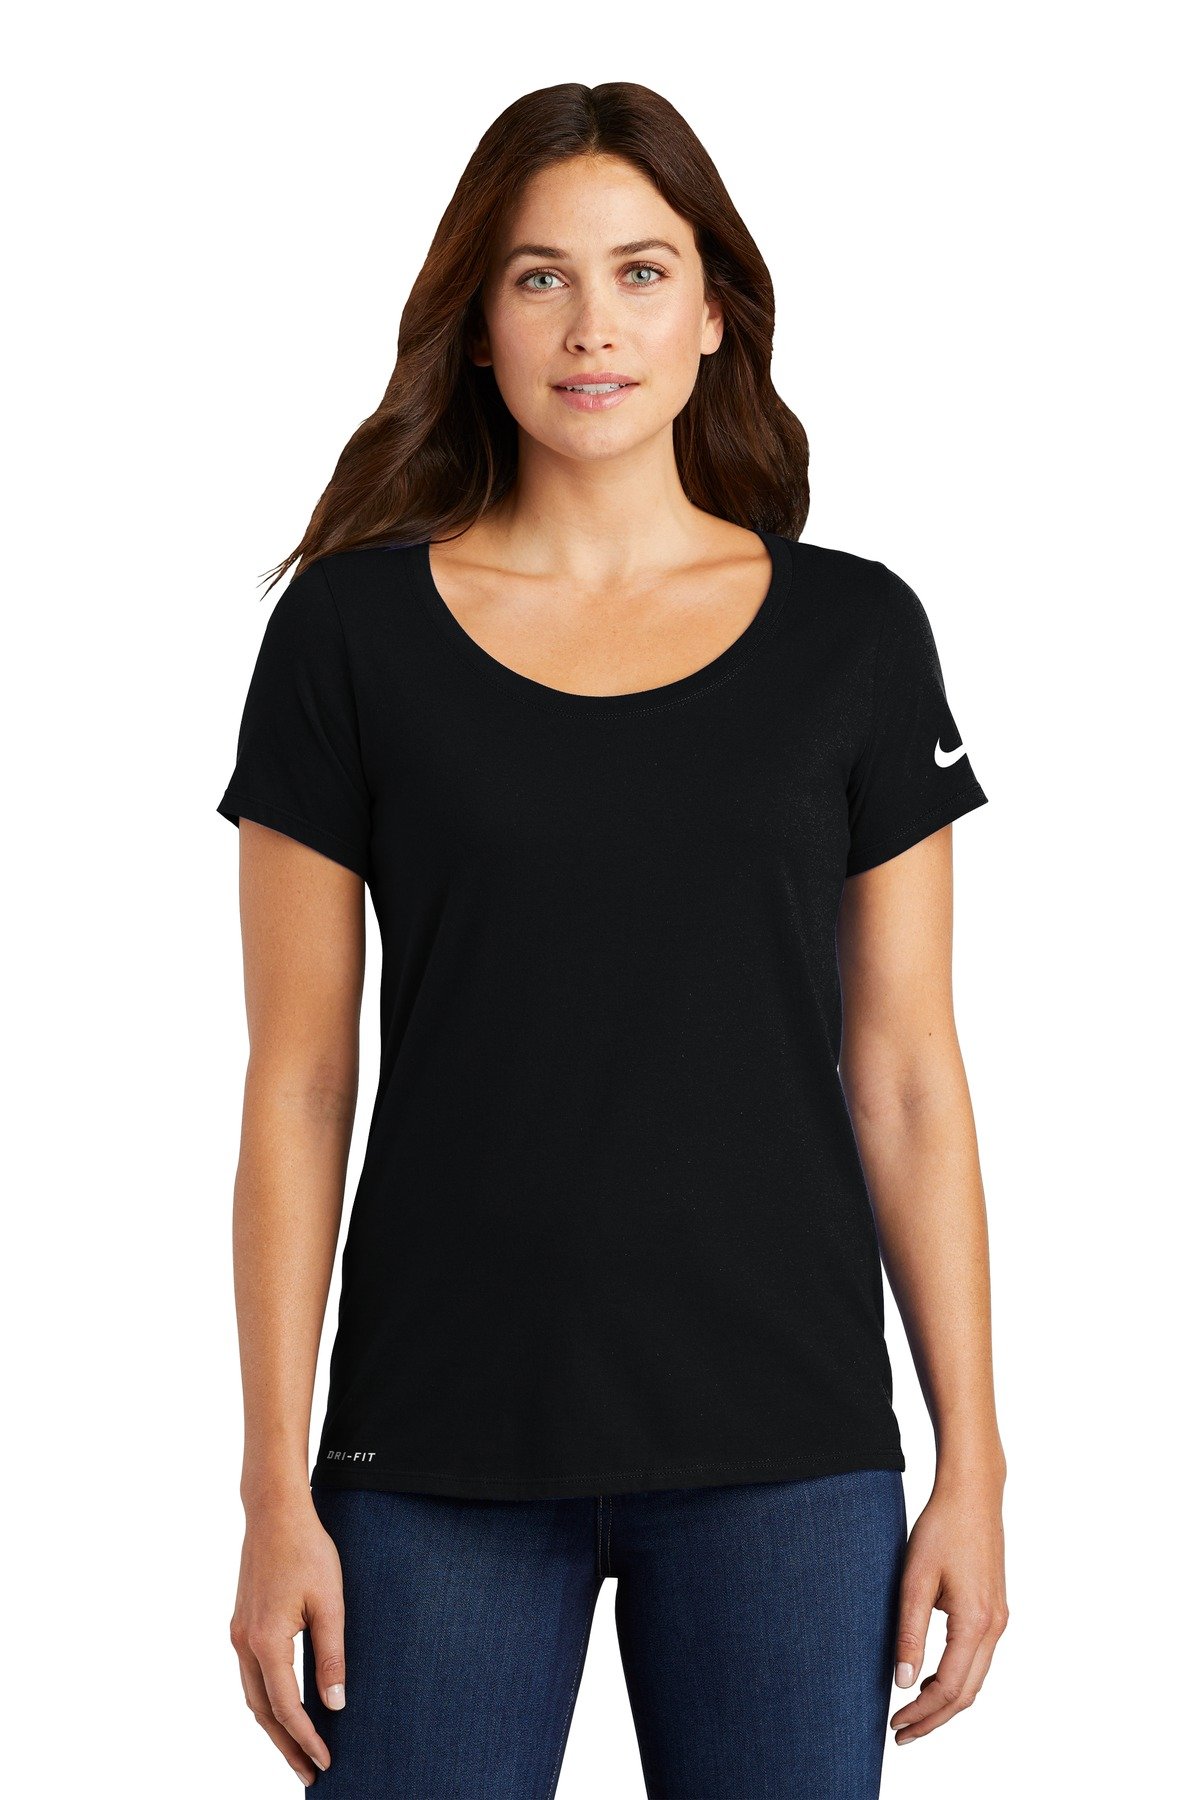 Front view of Ladies Dri-FIT Cotton/Poly Scoop Neck Tee